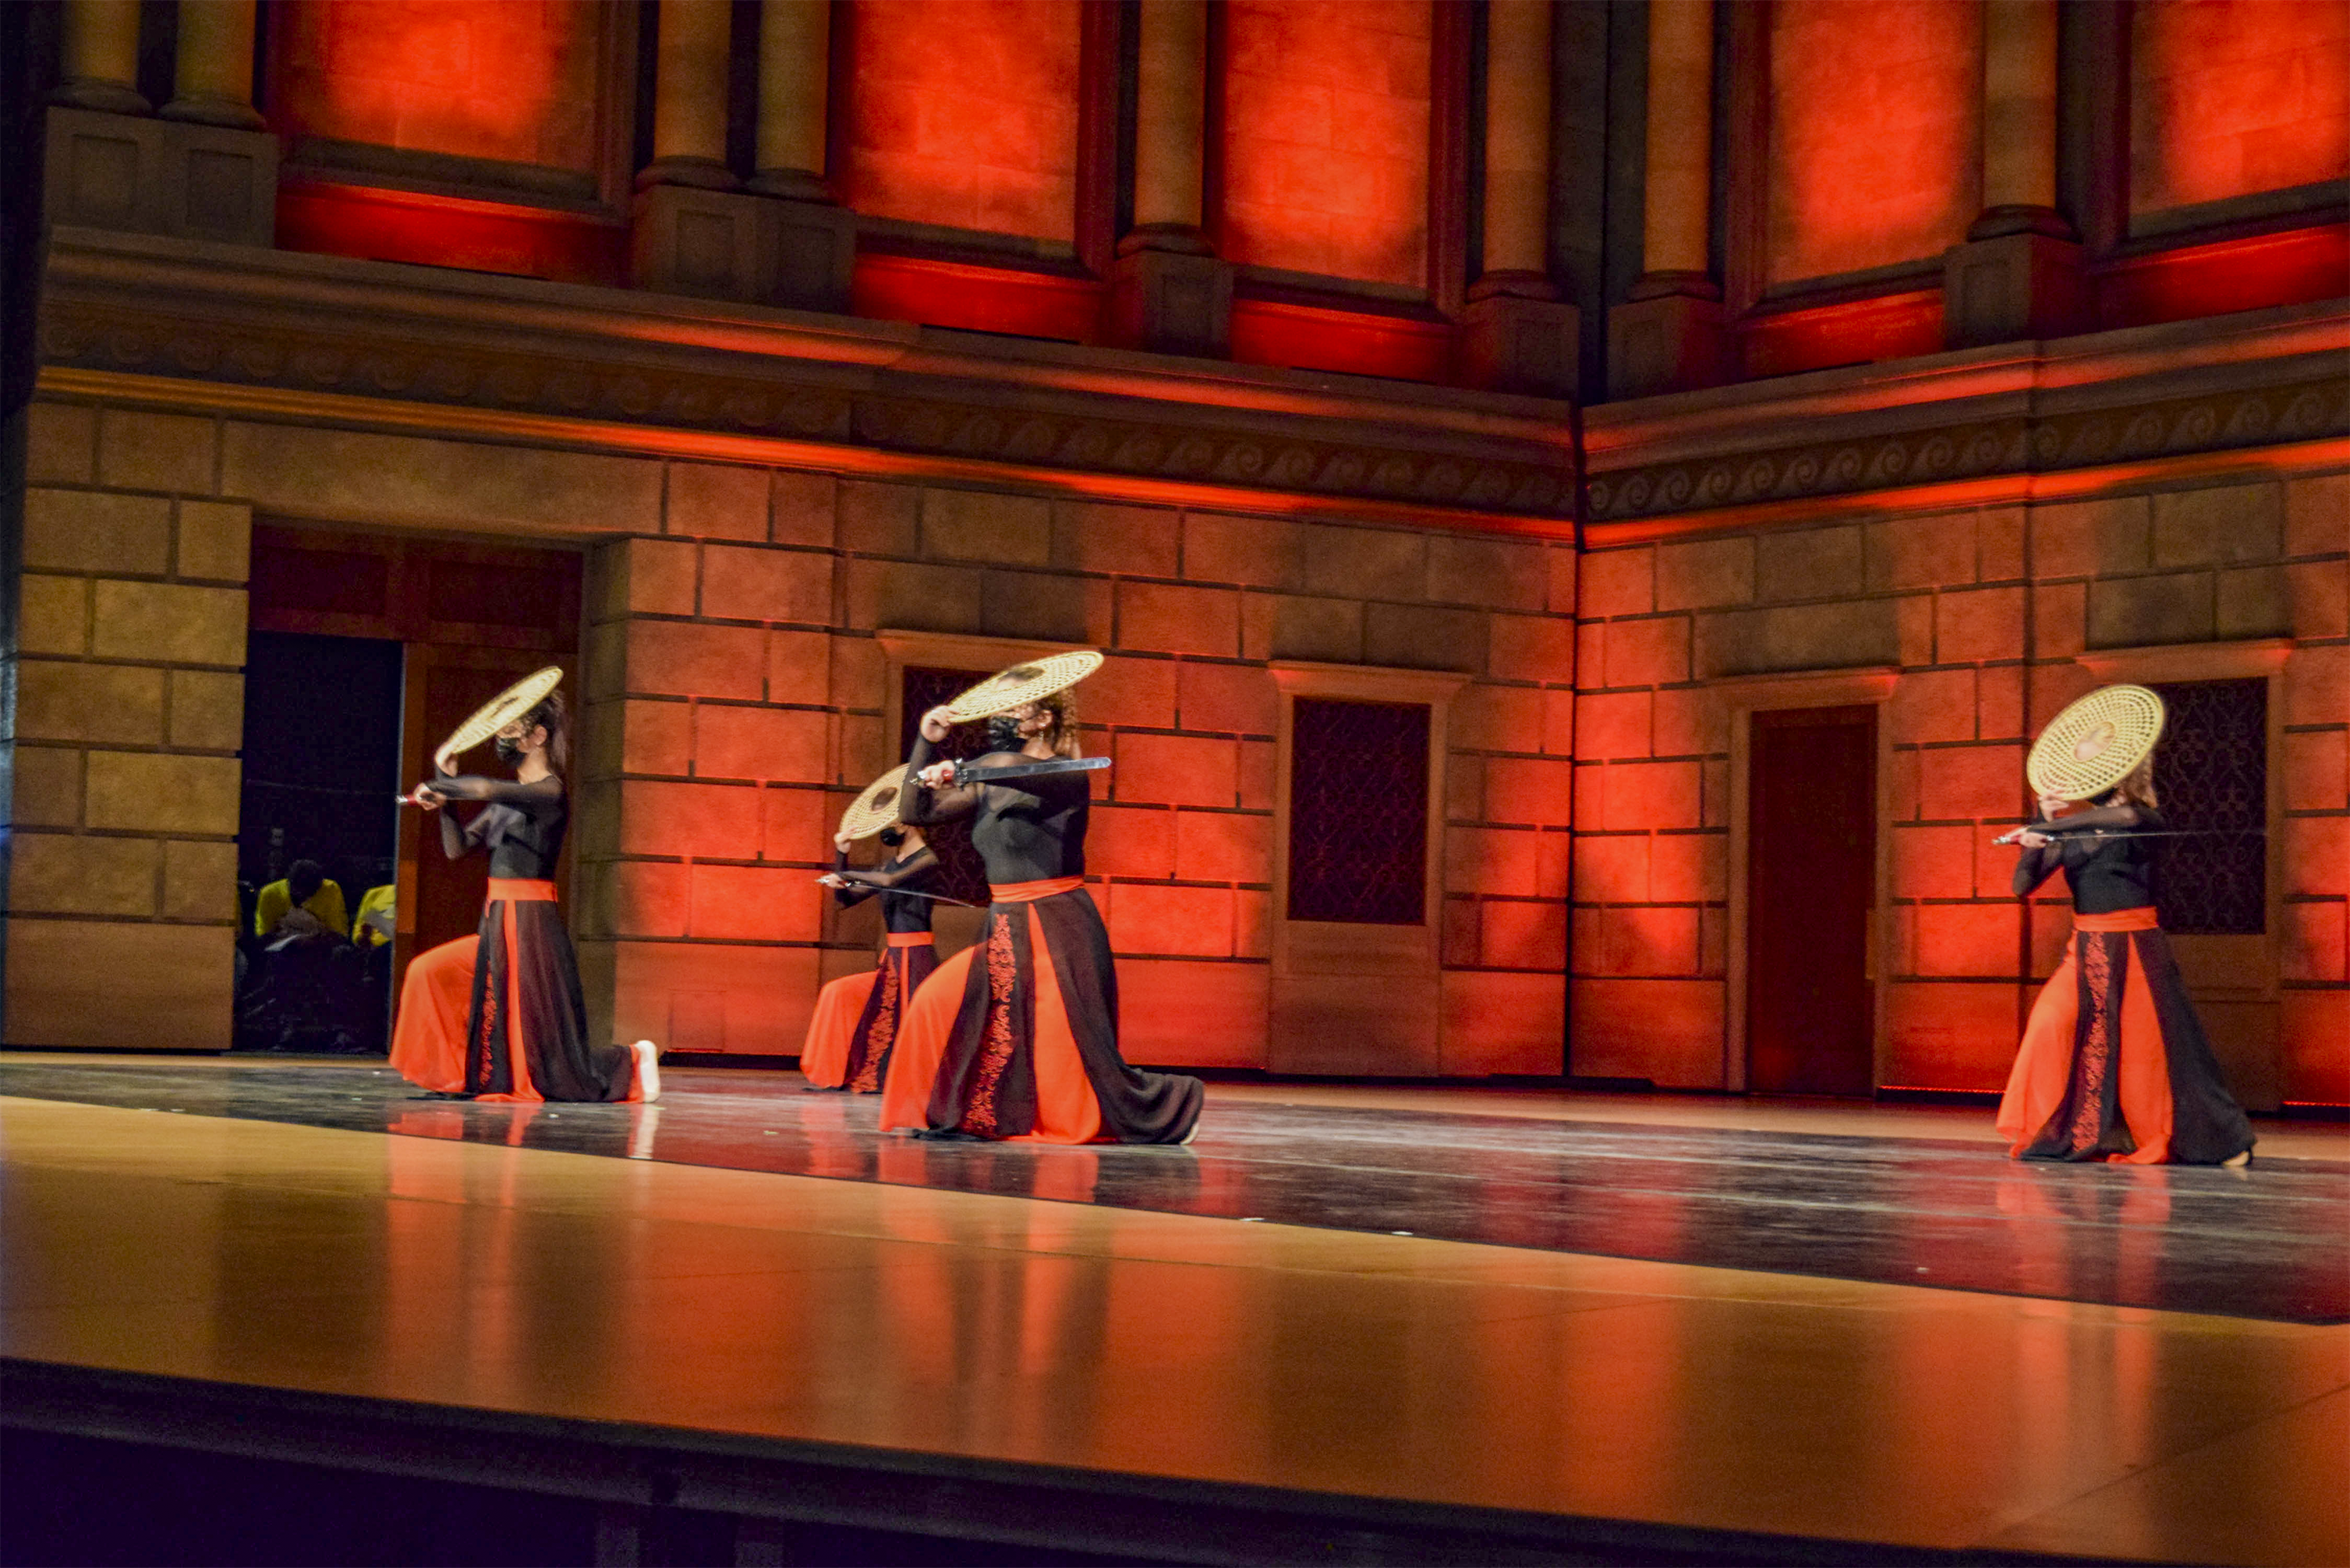 Student sword dance performance on stage